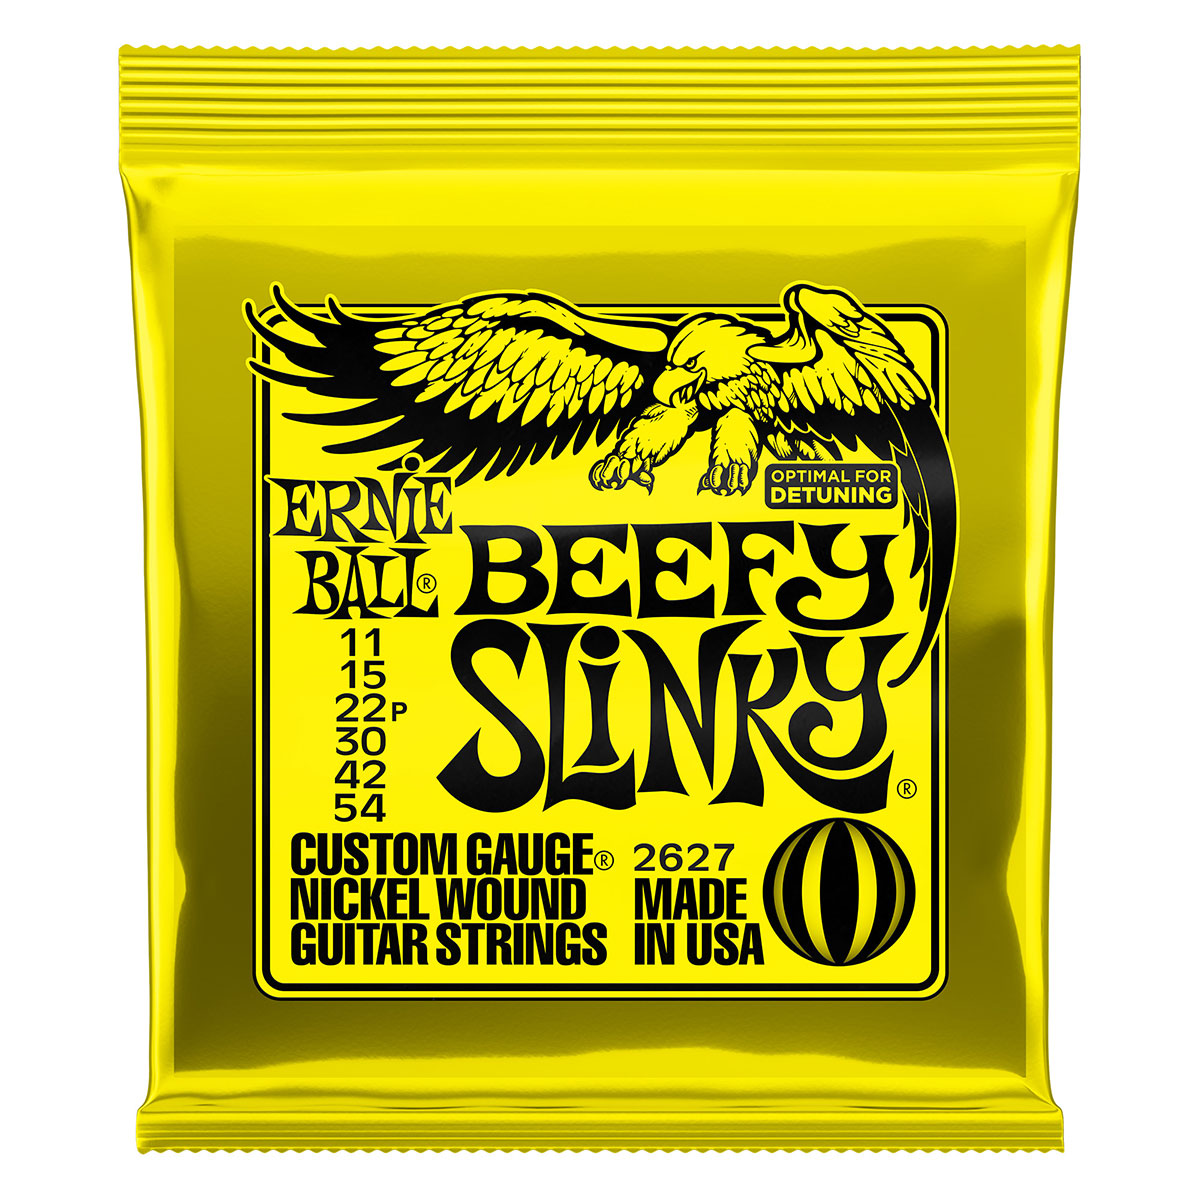 An image of Ernie Ball 2627 Beefy Slinky Guitar Strings 11-54 - Gift for a Guitarist